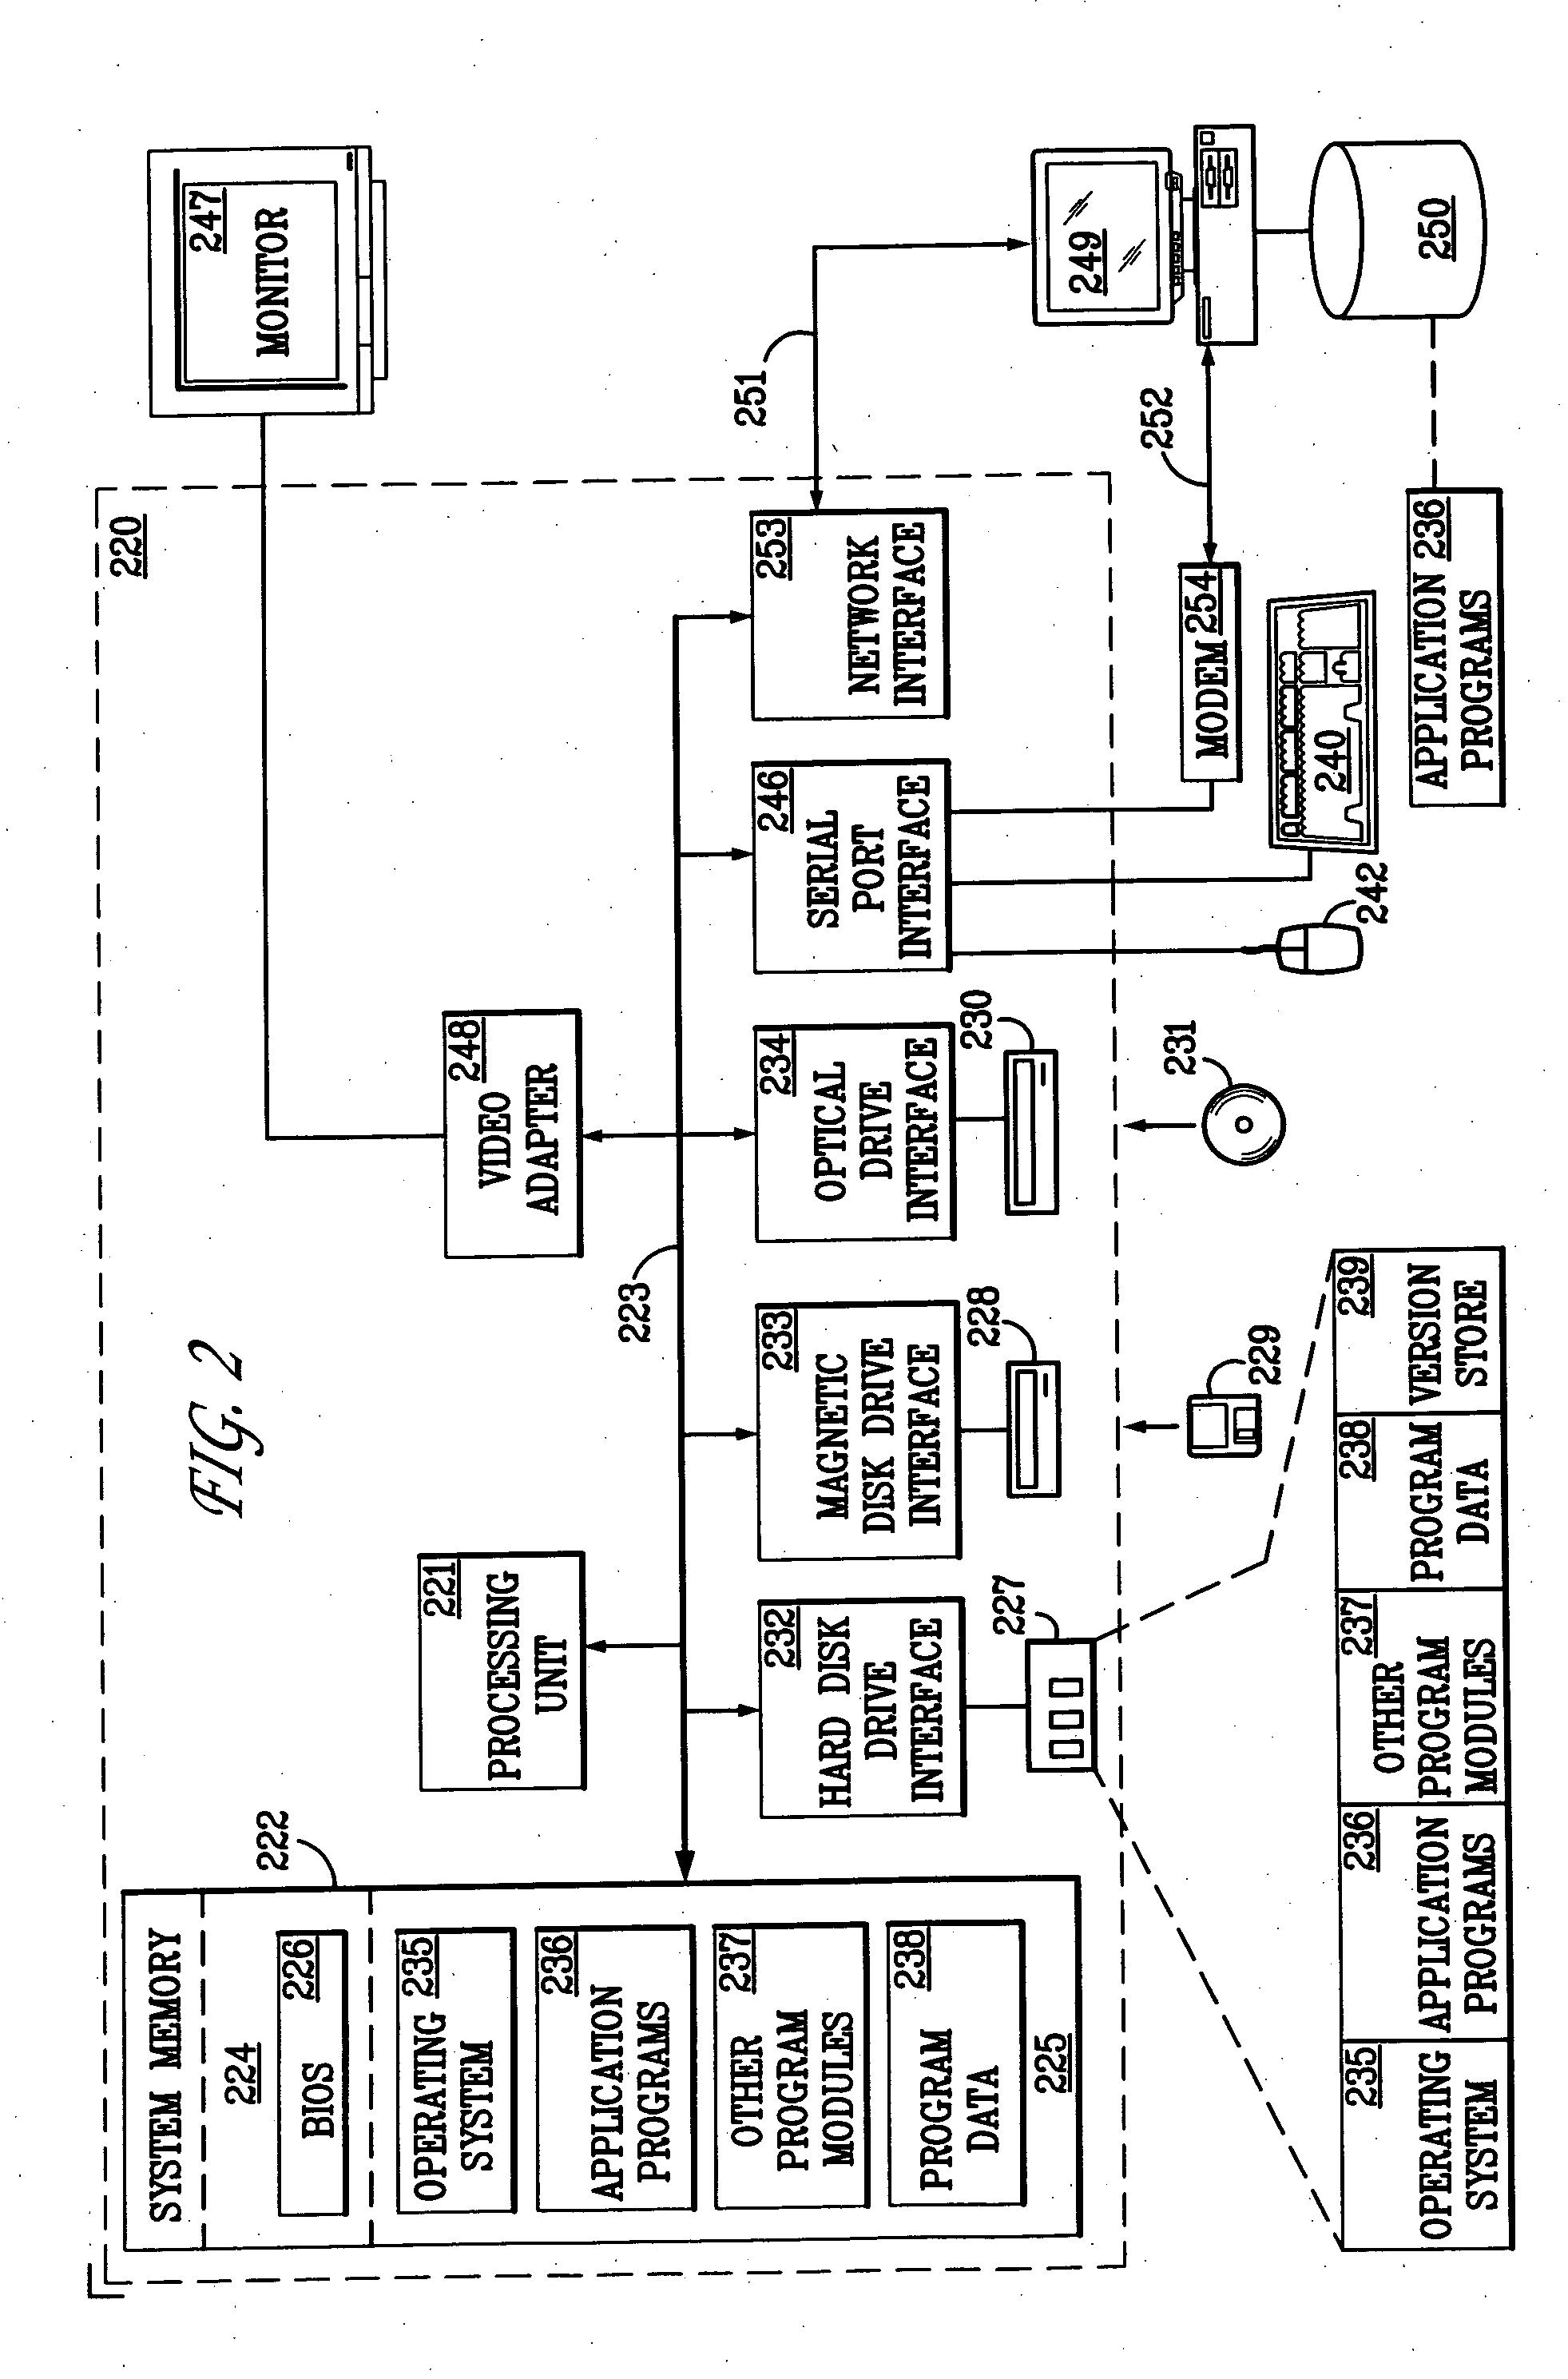 Project-based configuration management method and apparatus